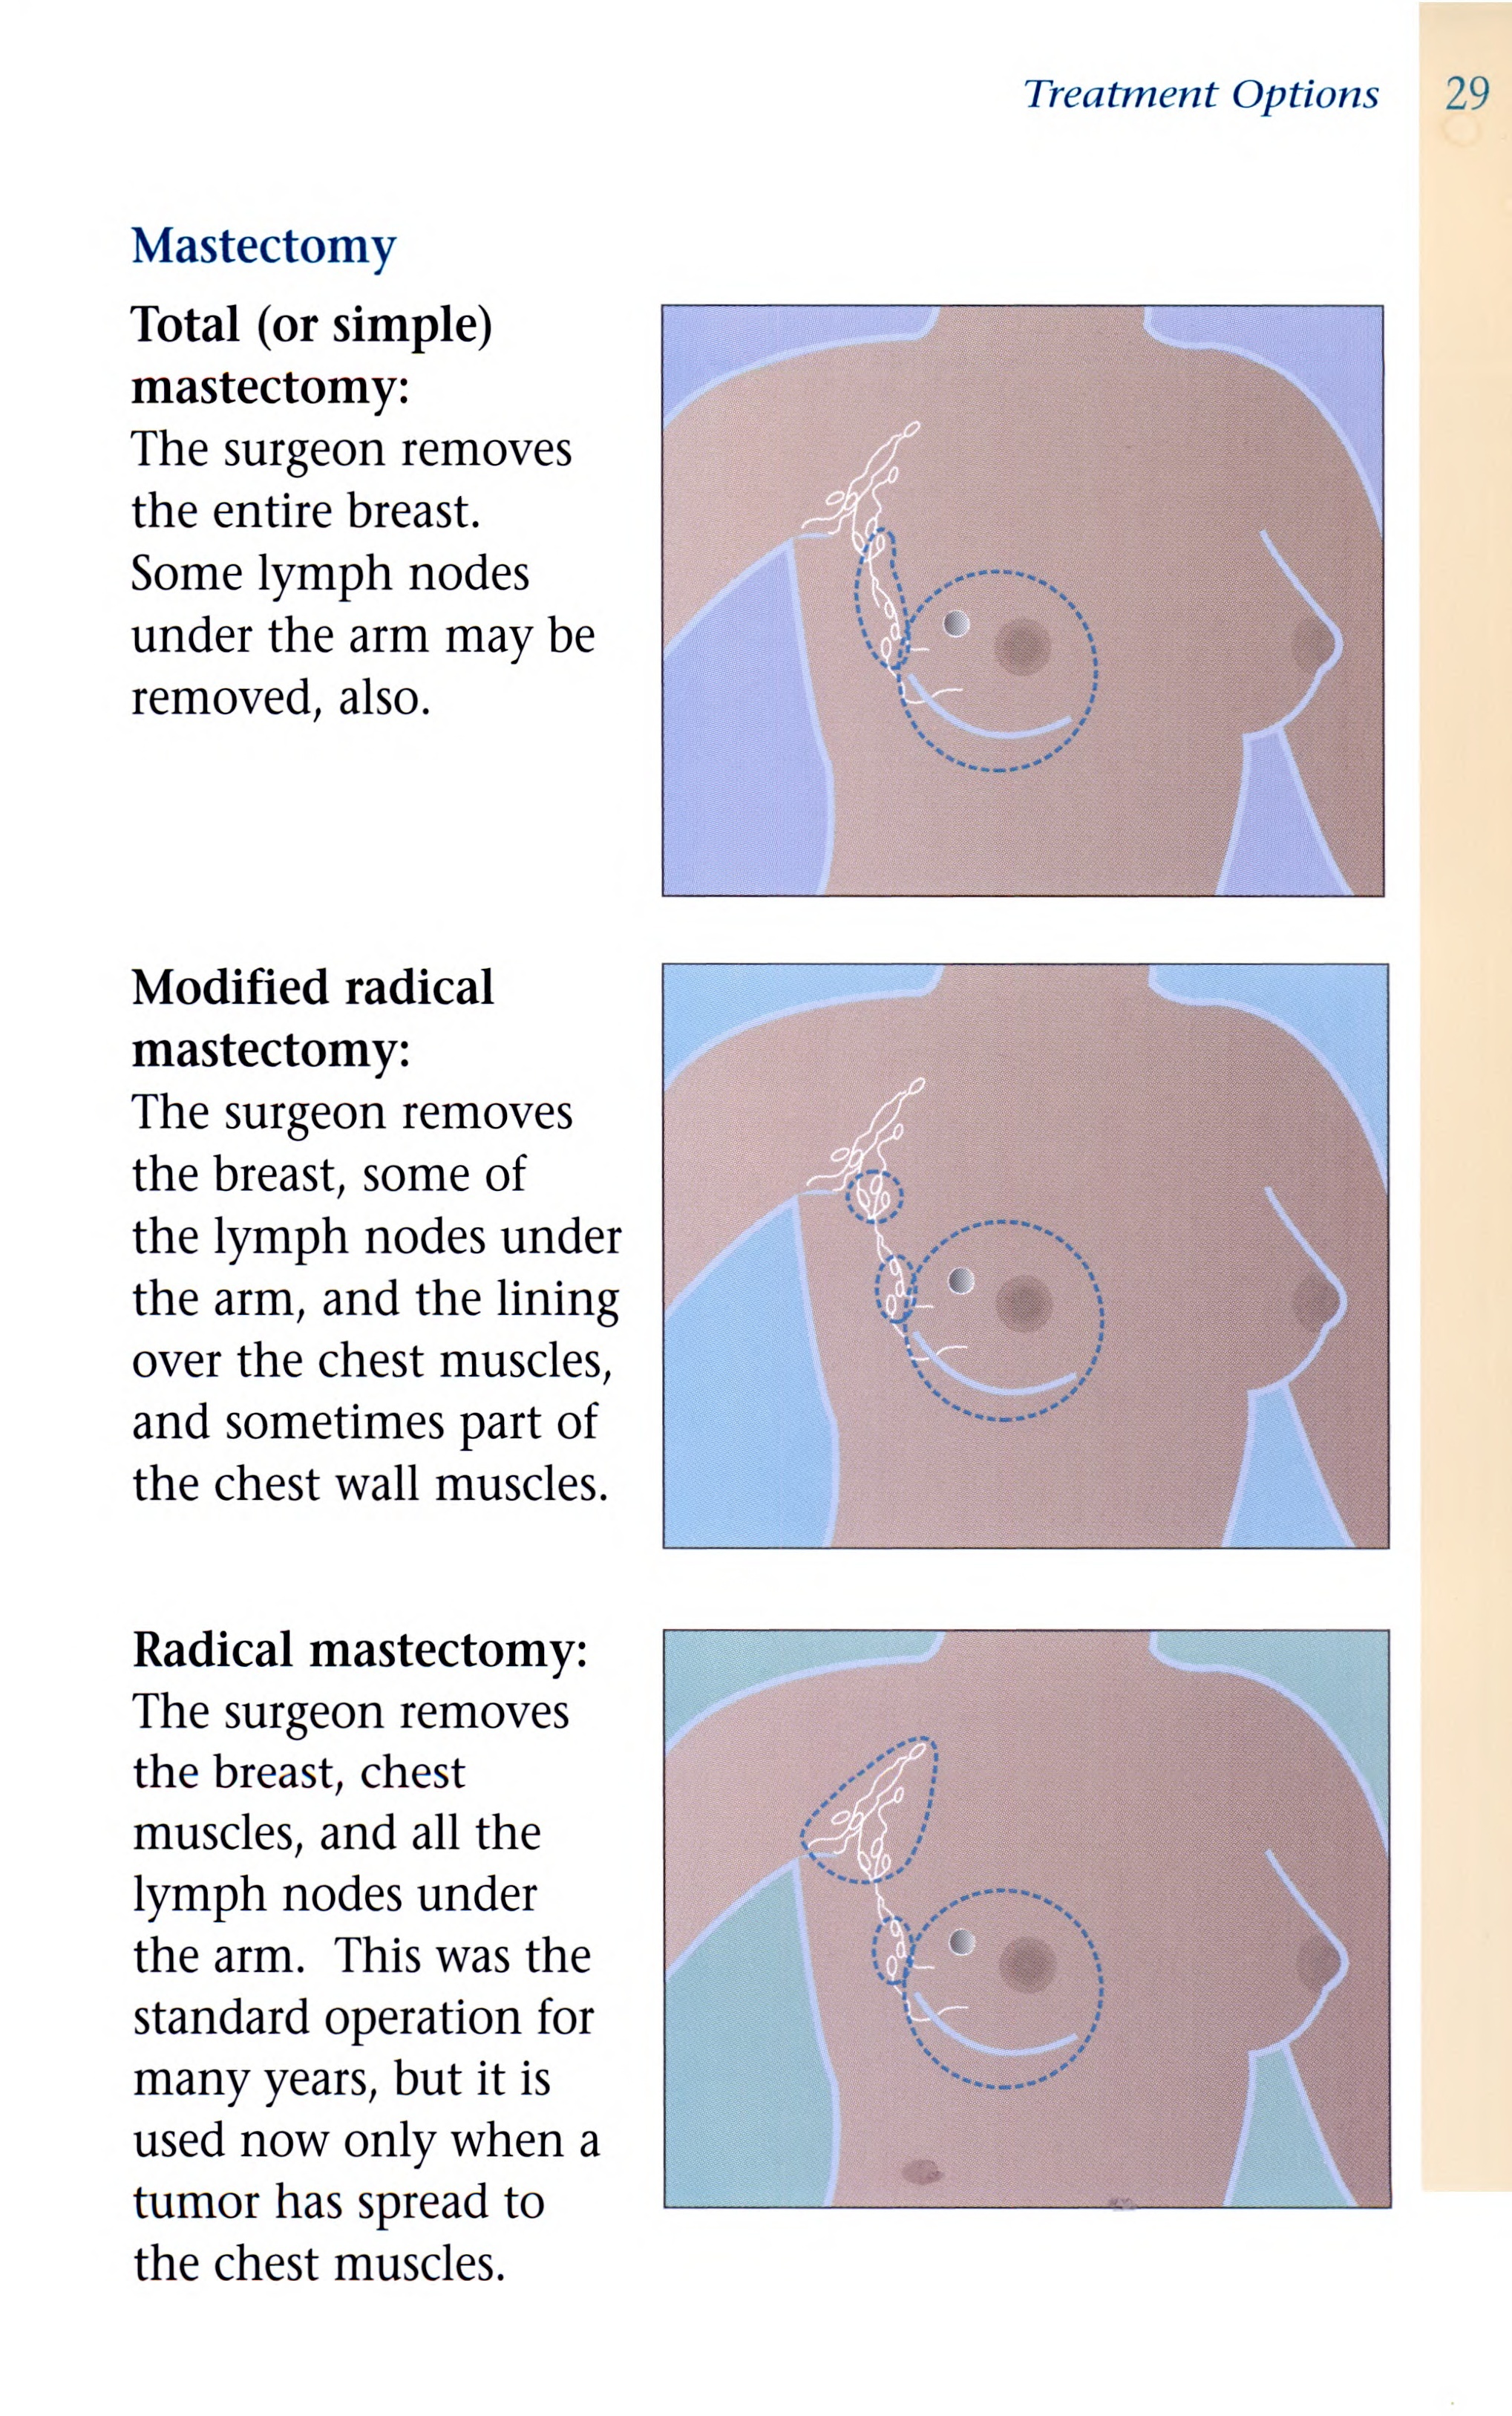 Mastectomy Options for Breast Cancer Patients